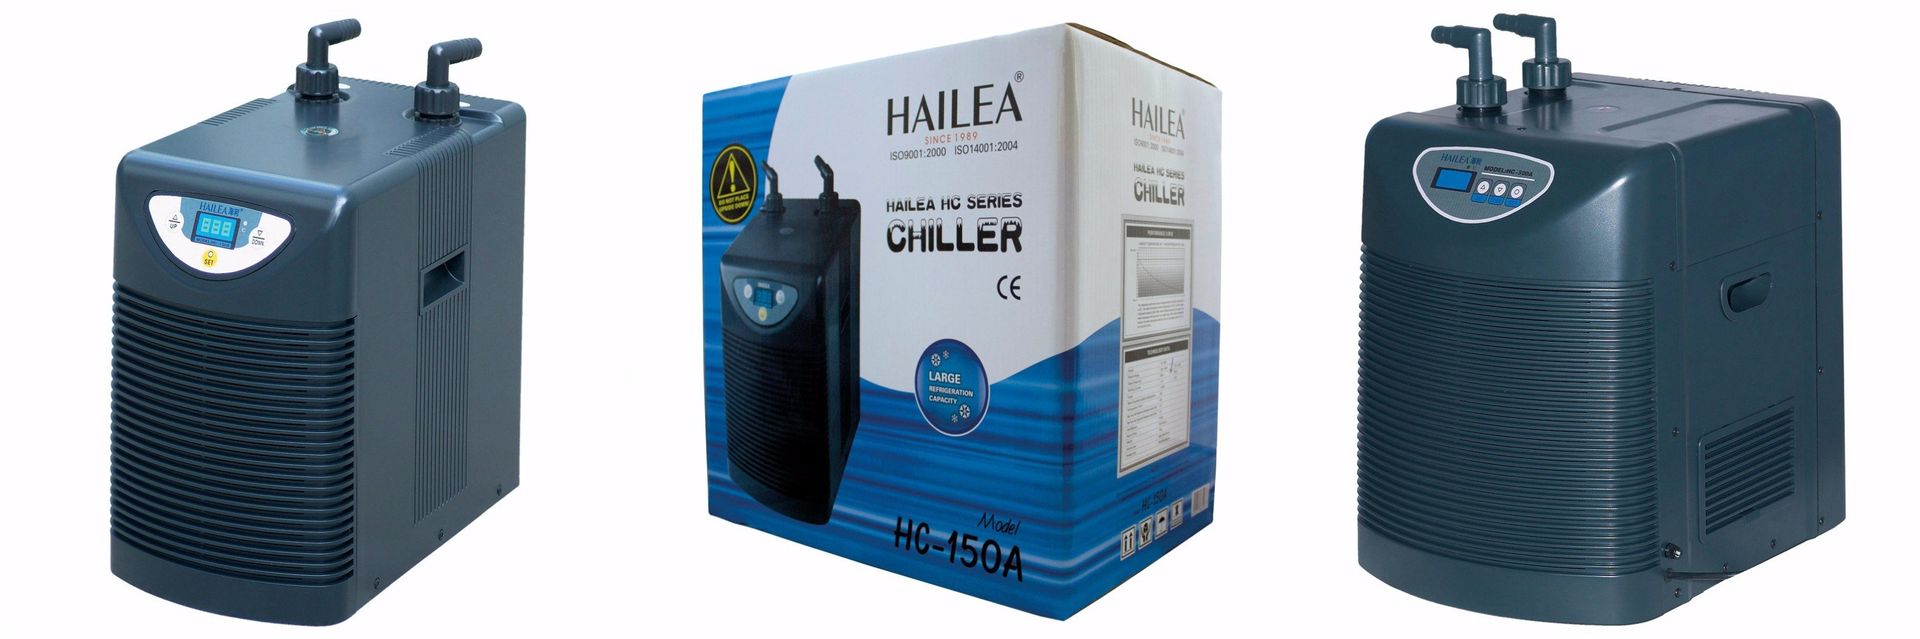 Remove the heat from the water in a hydroponics setup with these water chillers